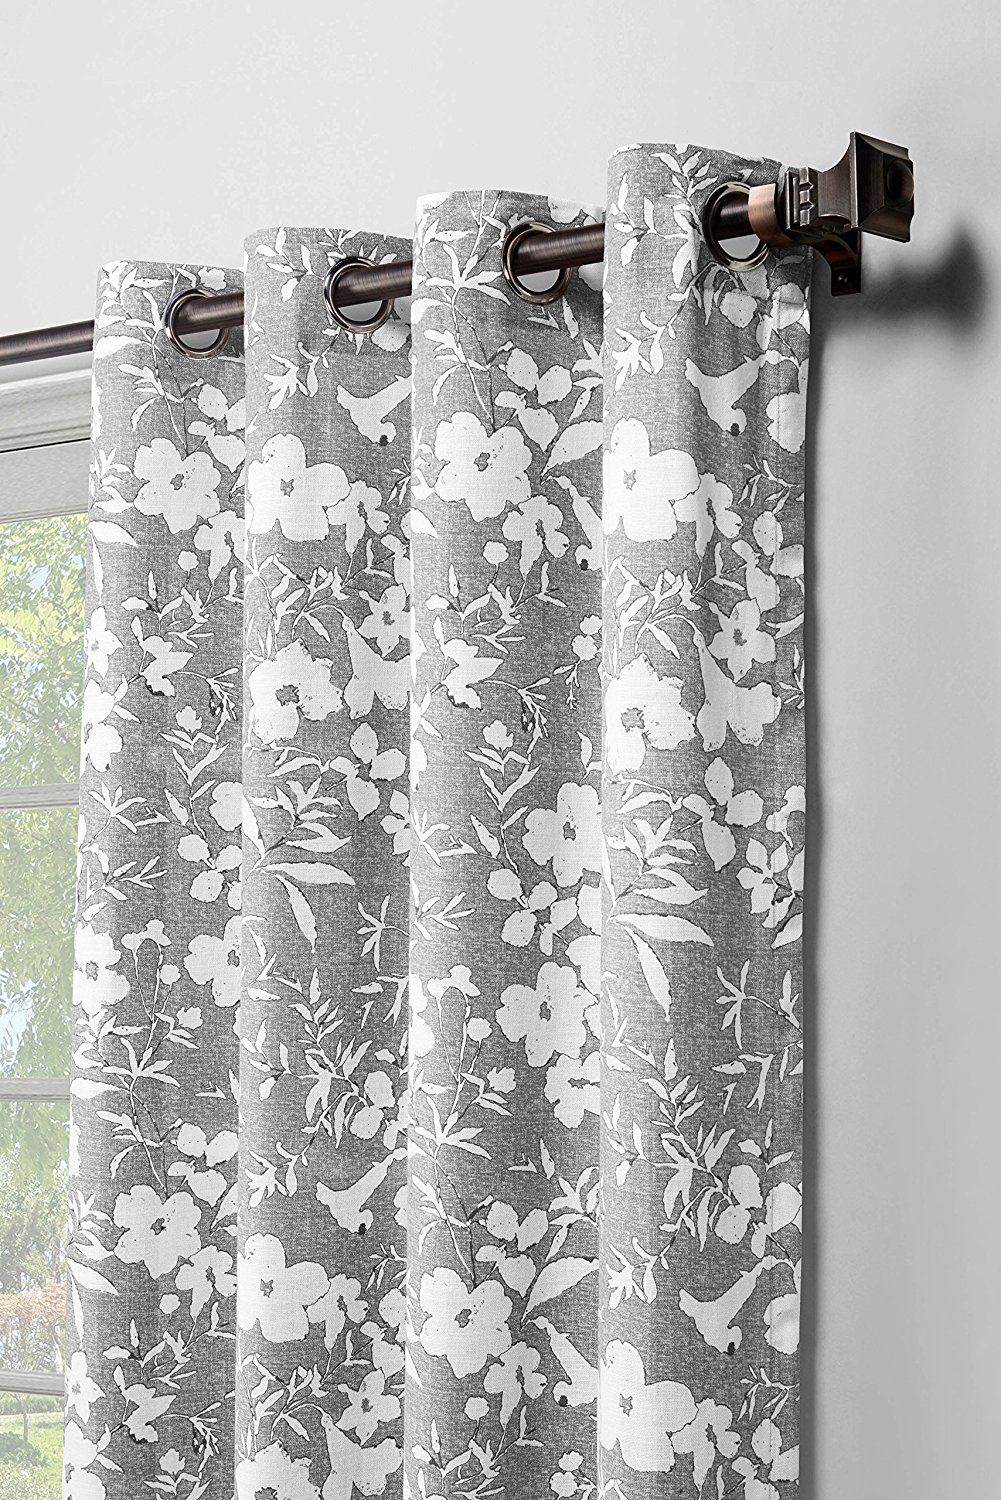 Window Elements Florabotanica Printed Cotton Extra Wide 104 x 84 in. Grommet Curtain Panel Pair, Grey